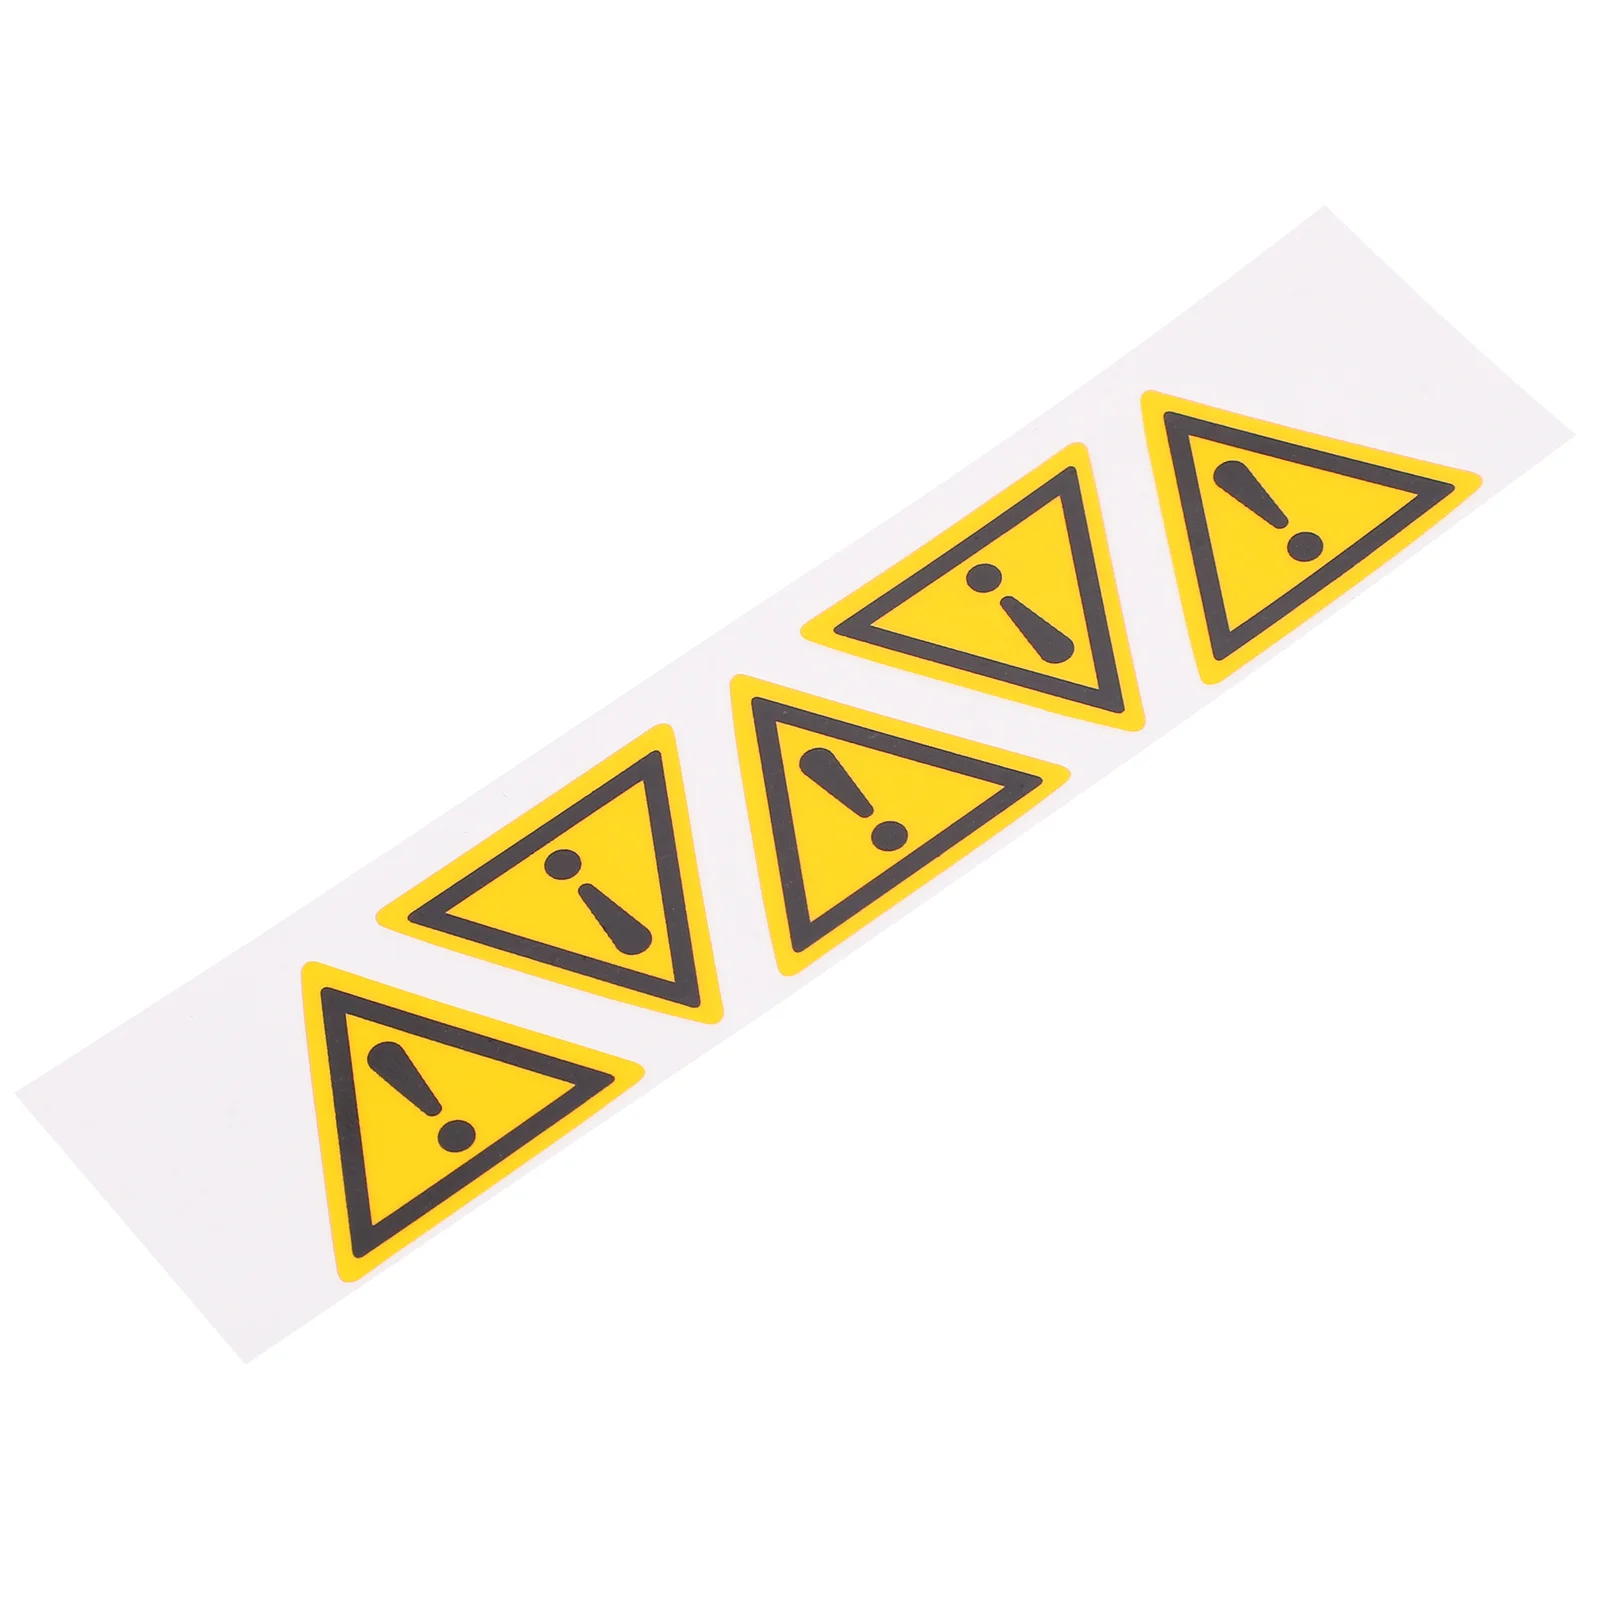 

5 Pcs Danger Exclamation Mark Triangle Sticker Adhesive Warning Sign Stickers Signs Self Nail Caution Signage for Safety